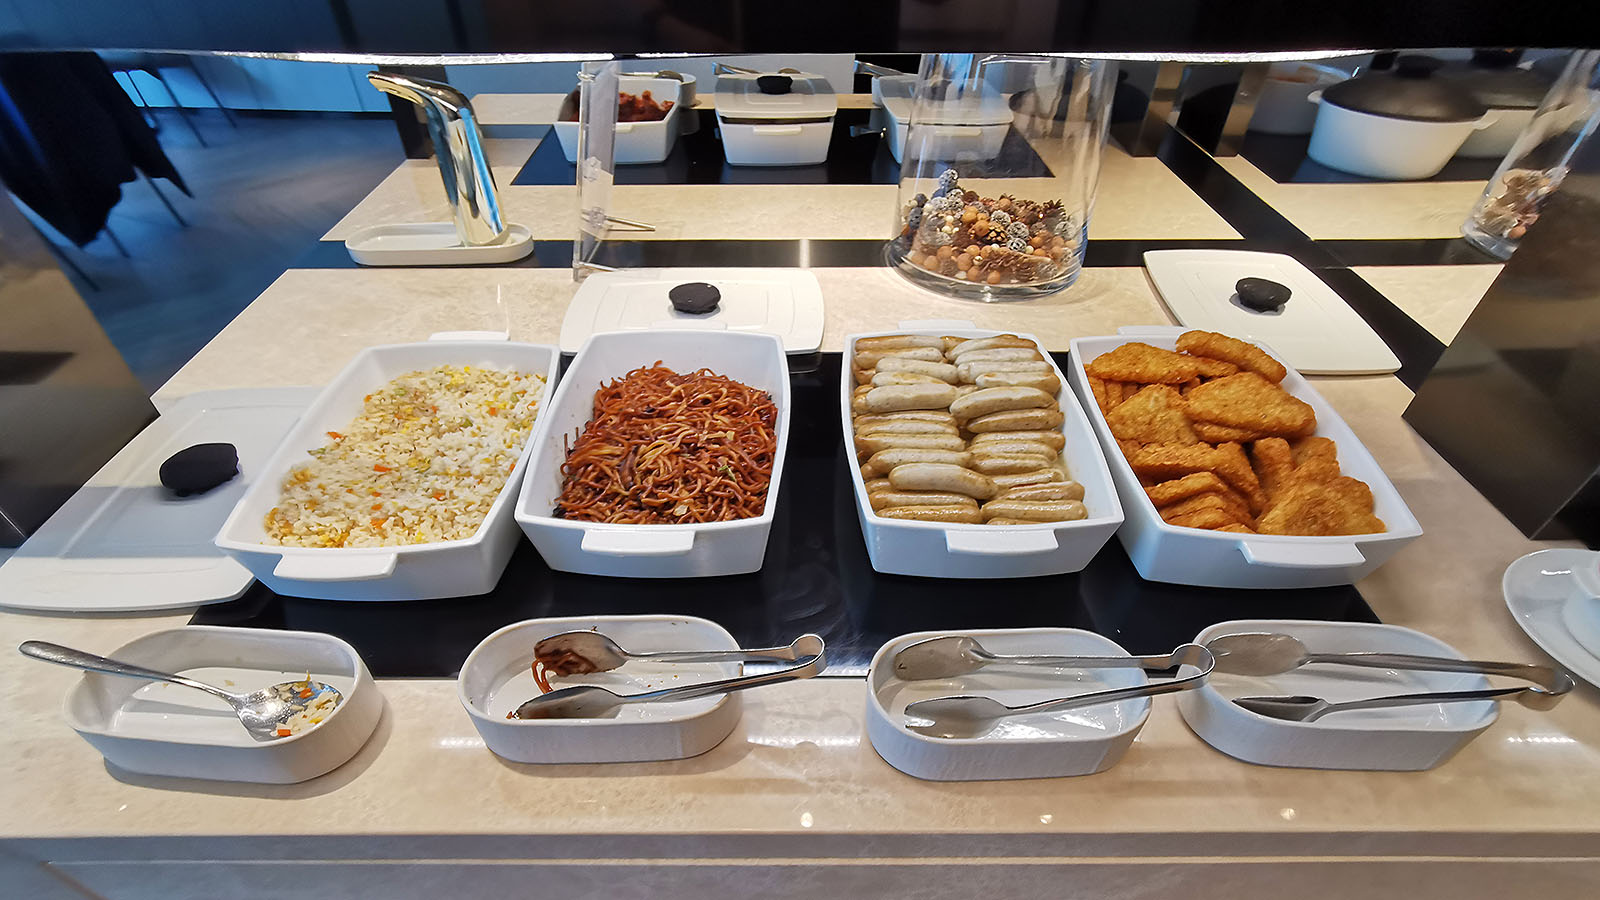 Hot Western breakfast options at Hilton Singapore Orchard Executive Lounge